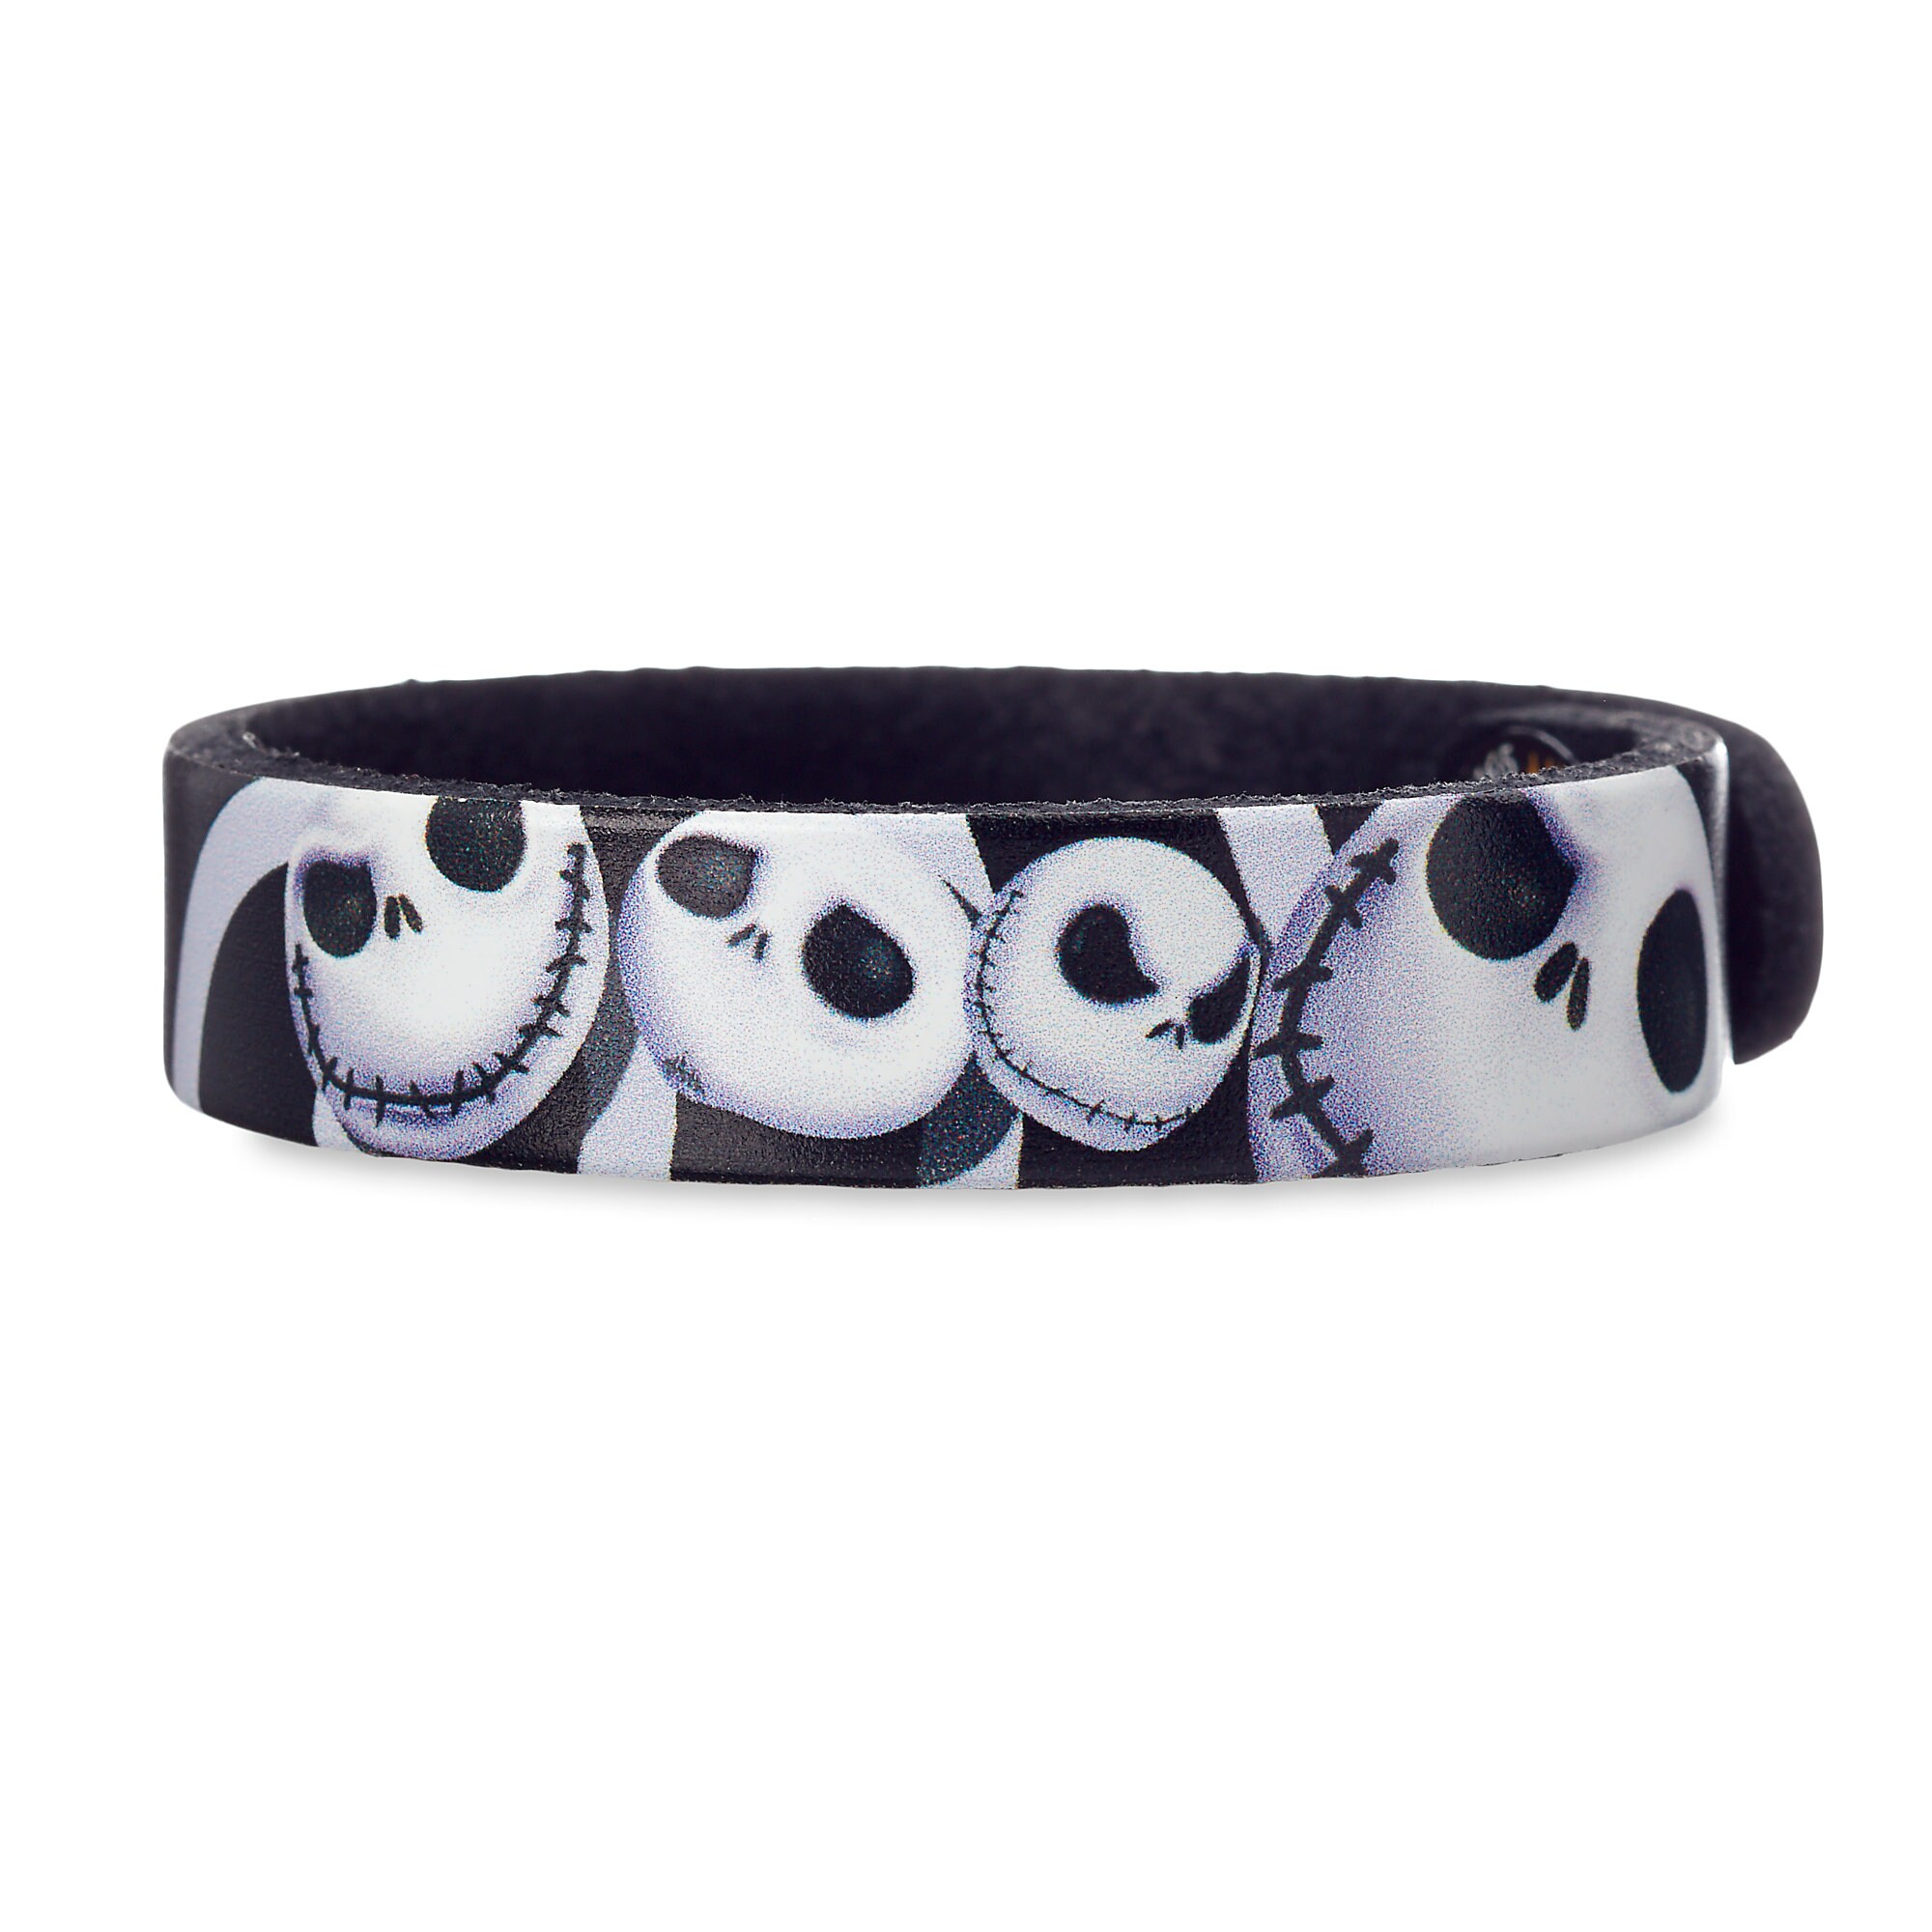 Tim Burton's The Nightmare Before Christmas Leather Bracelet - Personalizable